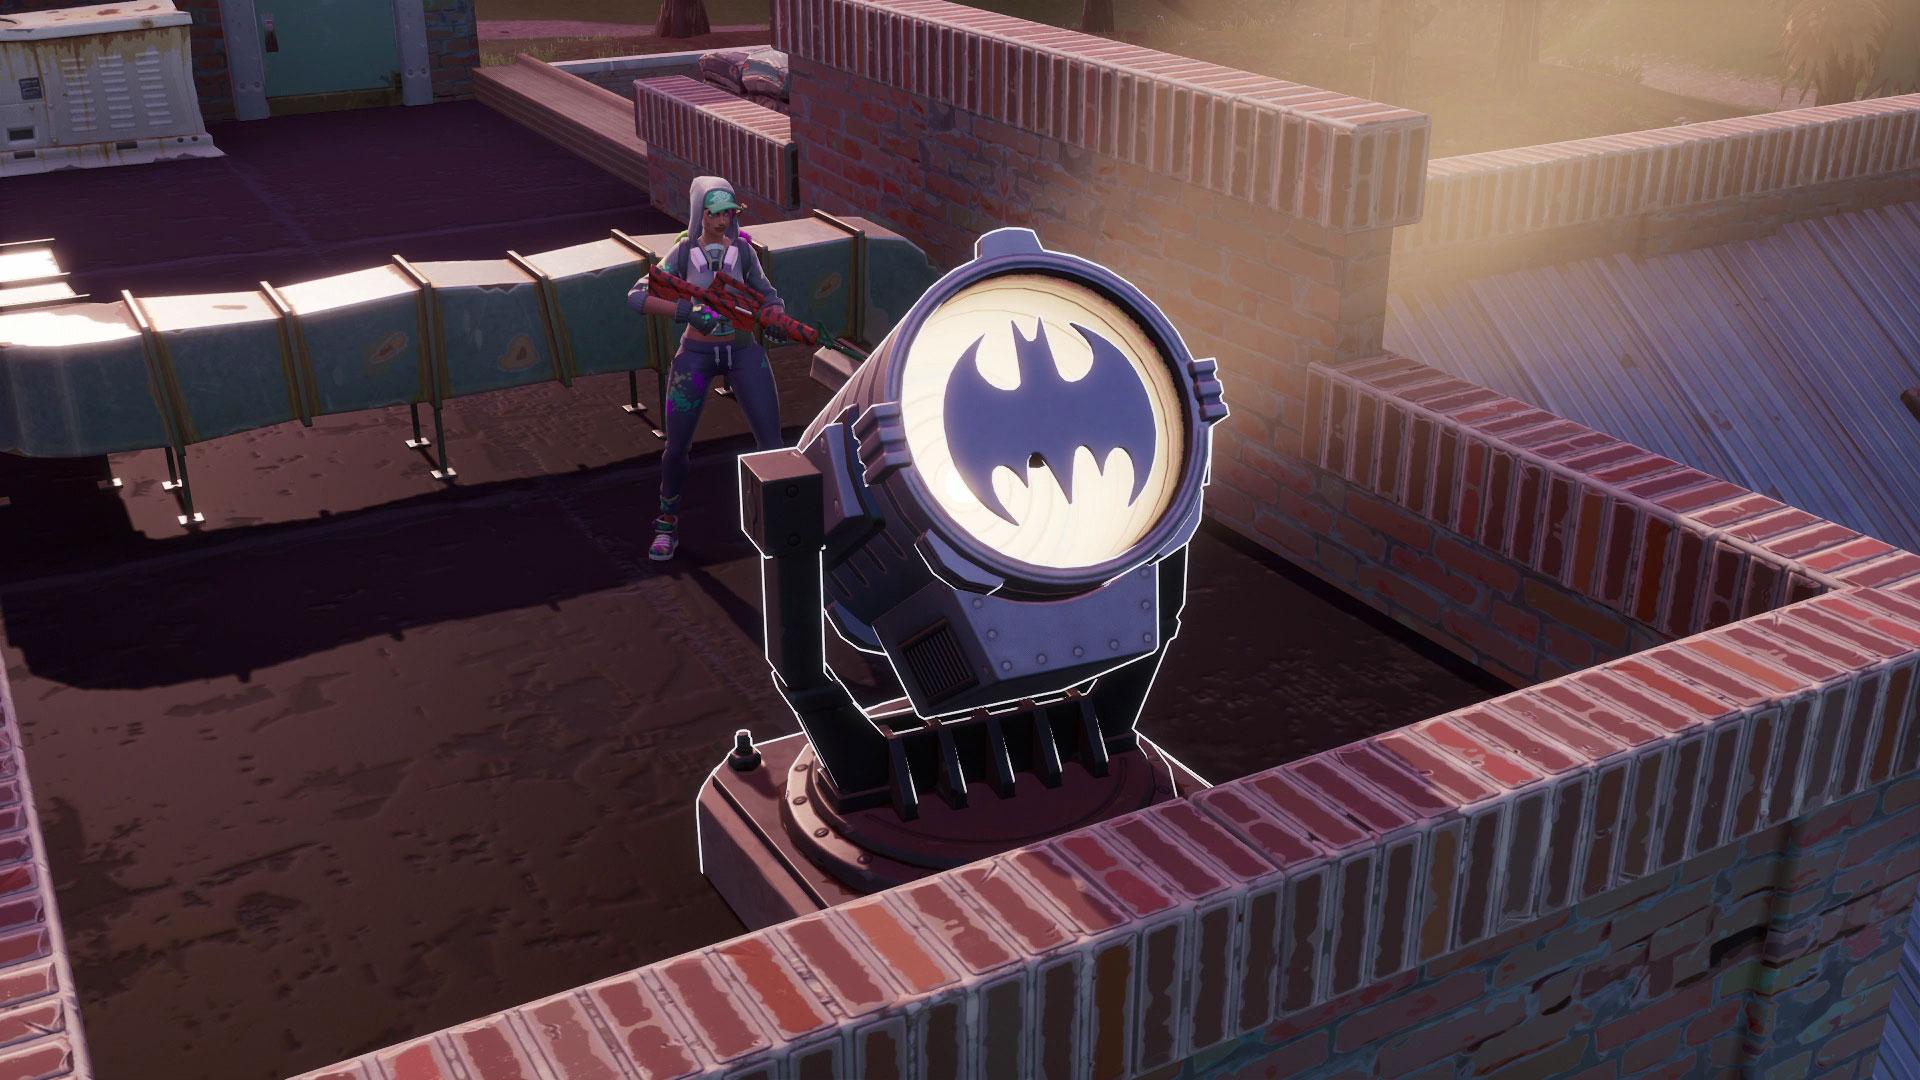 Fortnite Bat Signal locations: Where to light up different